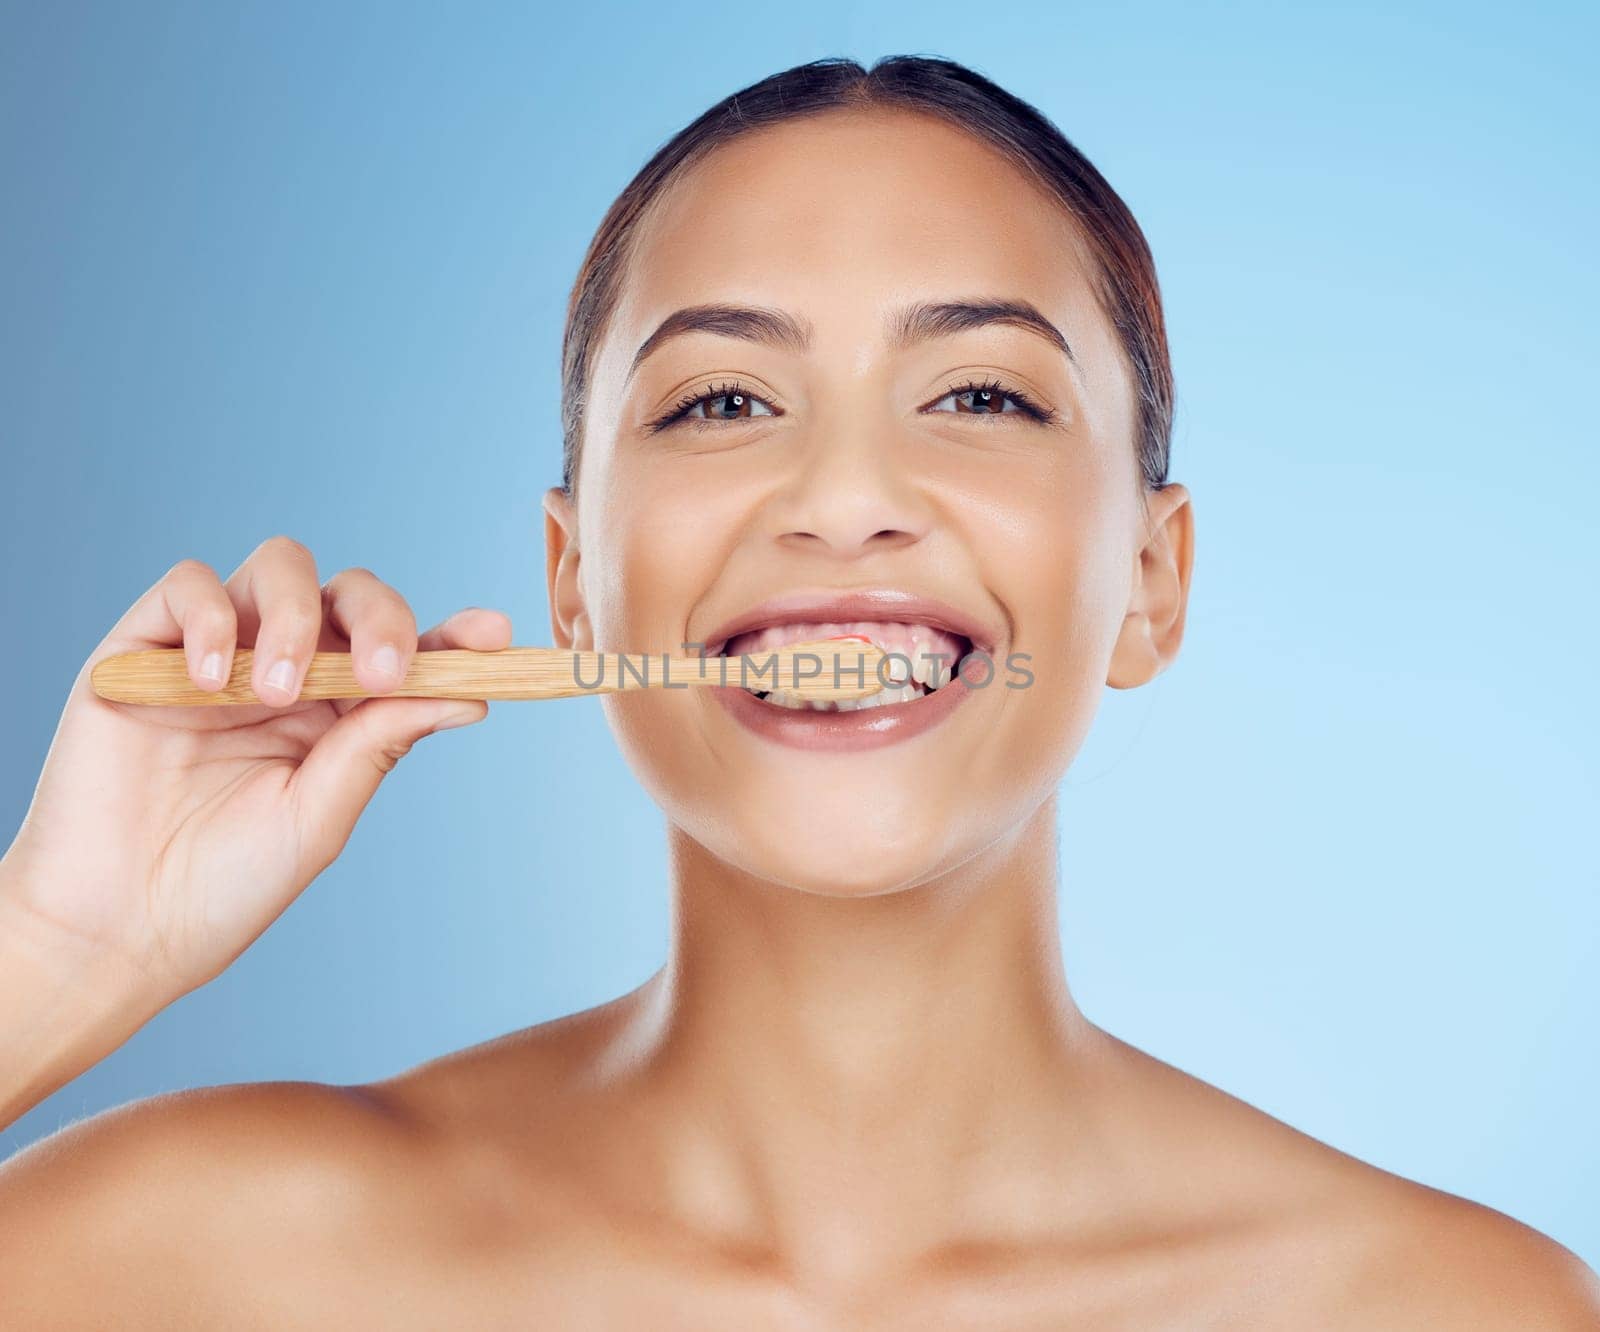 Teeth, woman and portrait of bamboo toothbrush for dental wellness, healthy cleaning or beauty cosmetics. Happy female, eco wooden brush and toothpaste of mouth, face smile and studio blue background.